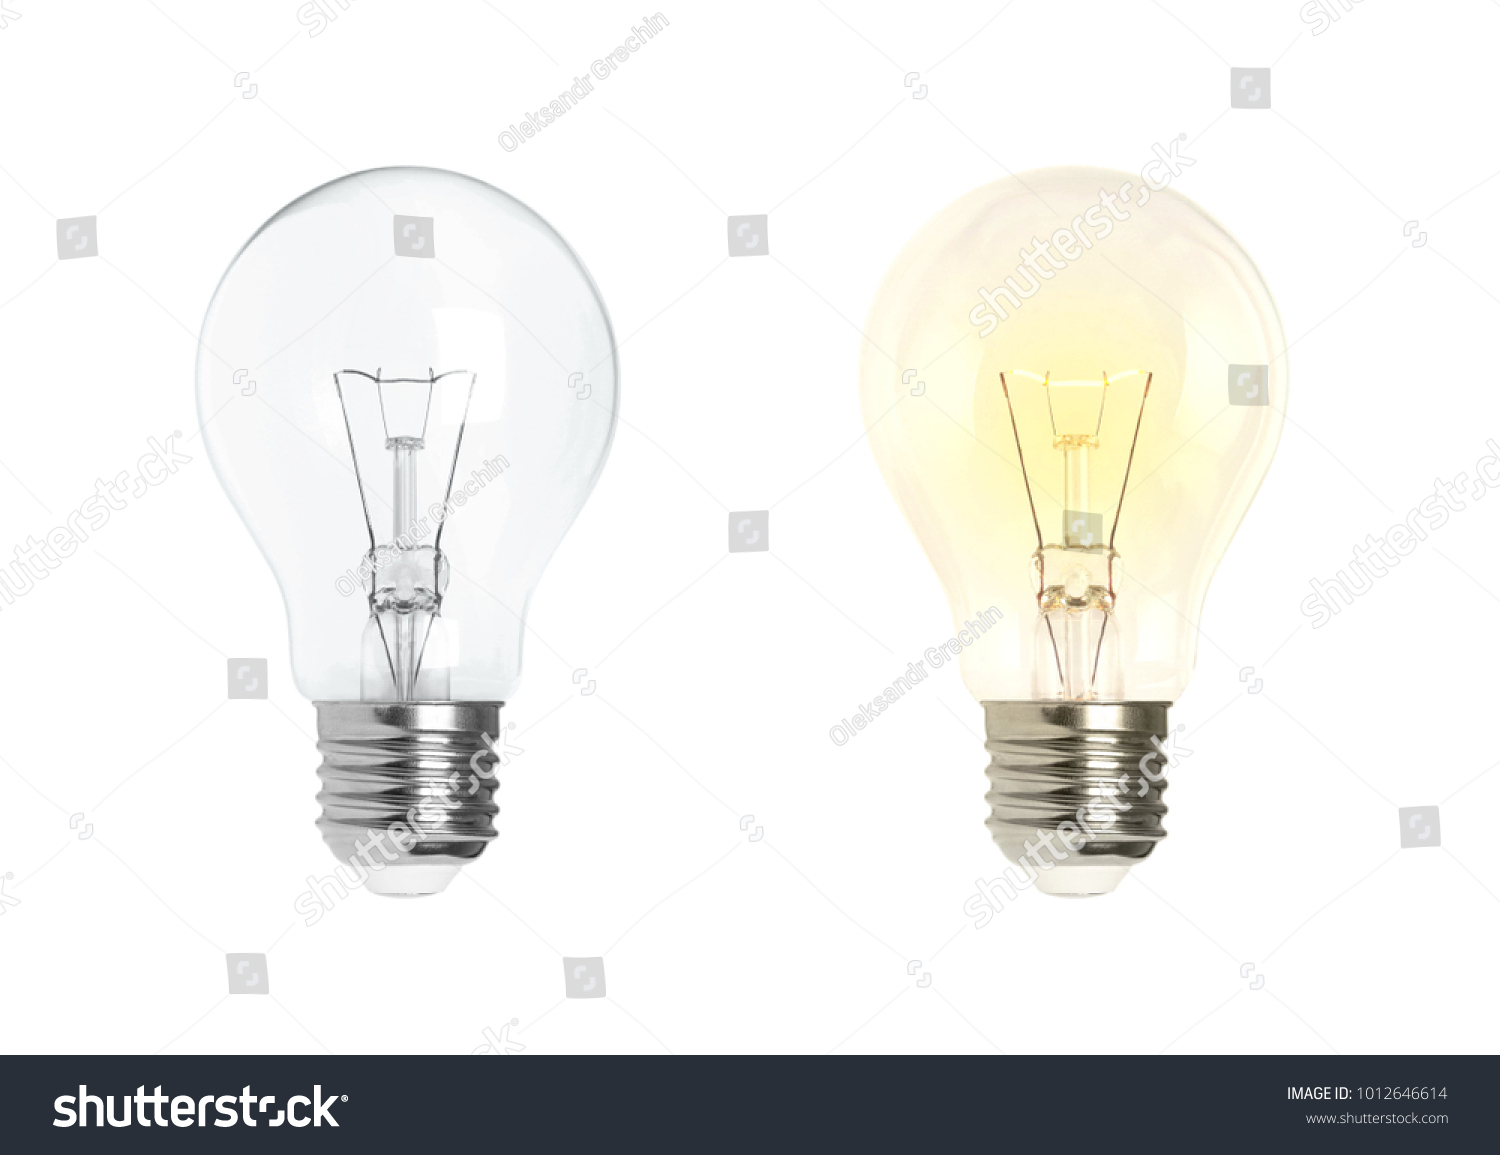 Glowing electric light bulb isolated #1012646614